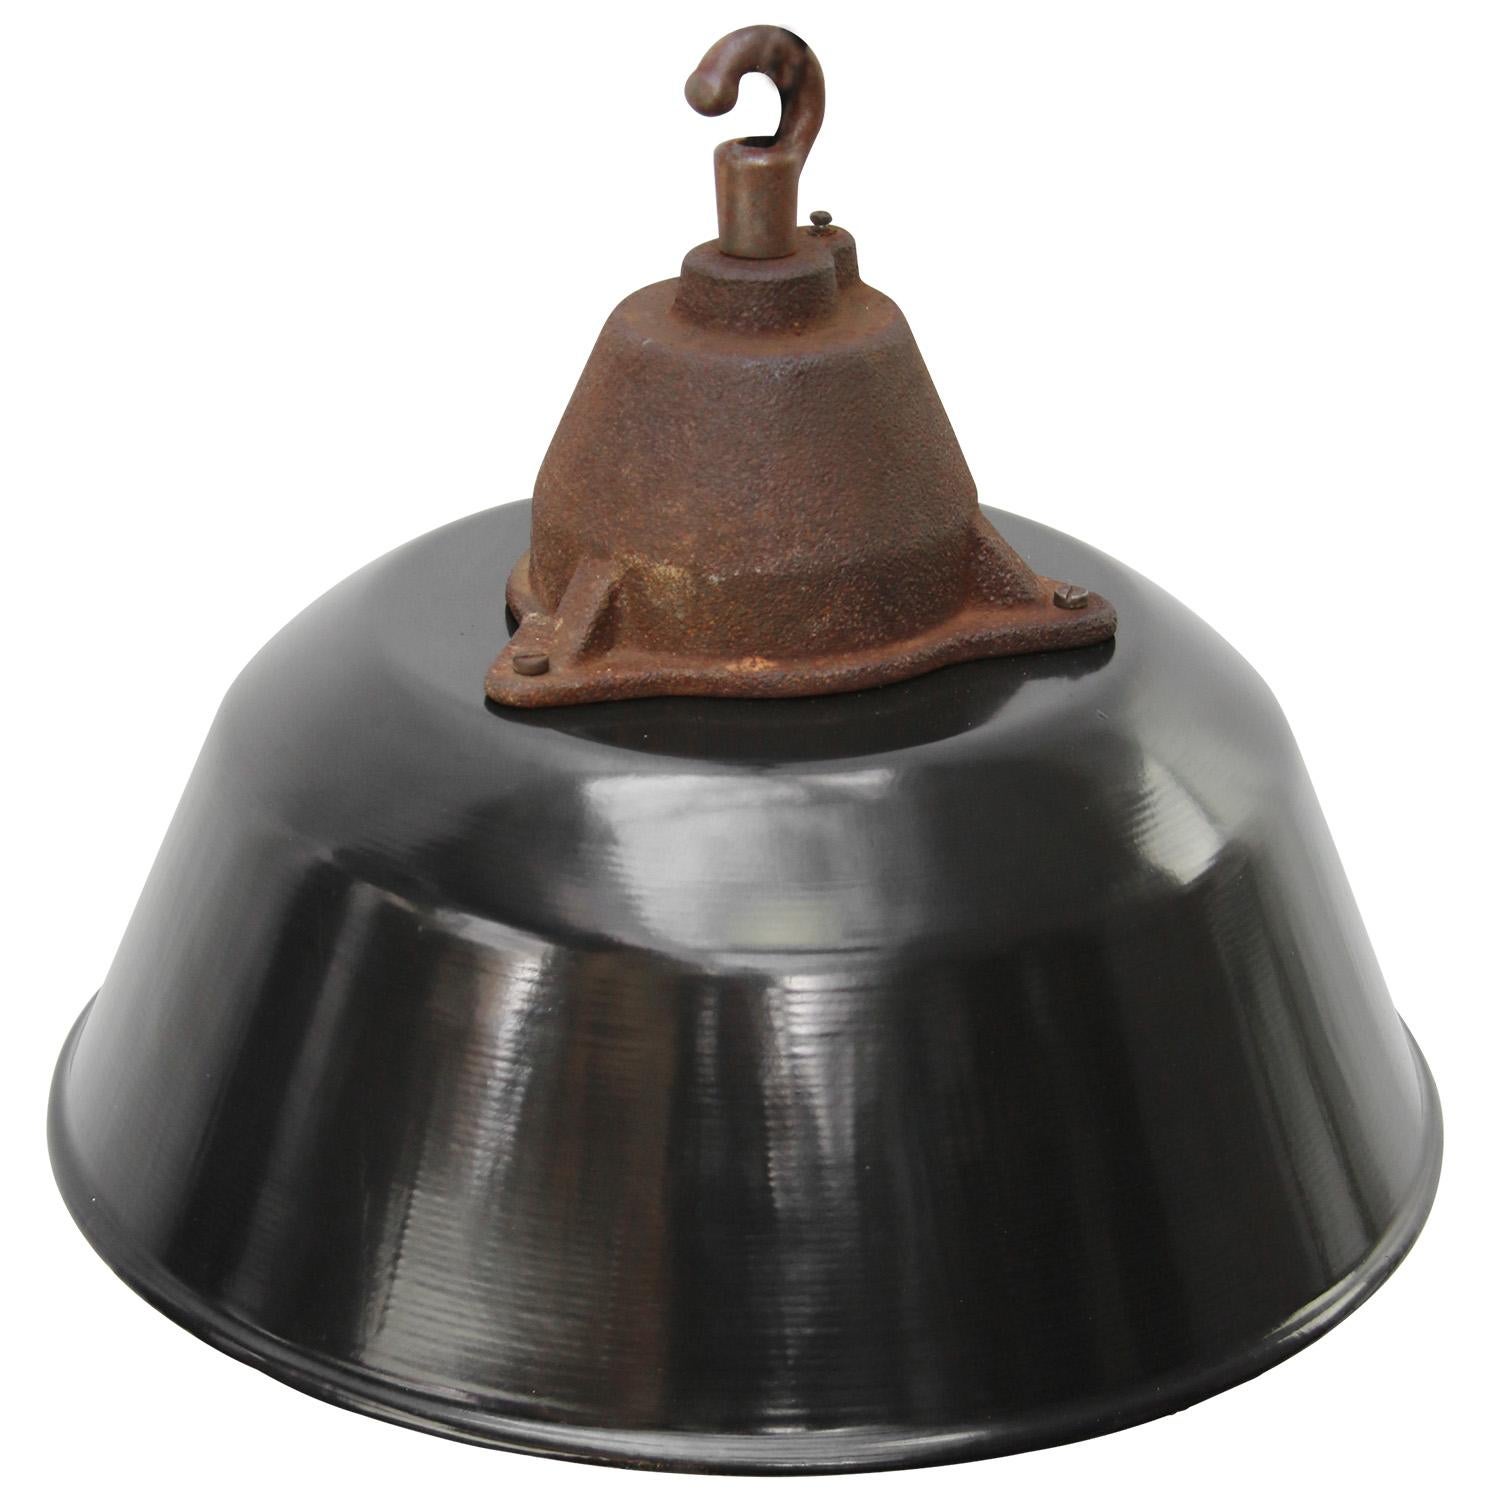 Factory pendant light
Black enamel white interior
Cast iron top with clear glass 

Weight 3.4 kg / 7.5 lb

Priced per individual item. All lamps have been made suitable by international standards for incandescent light bulbs, energy-efficient